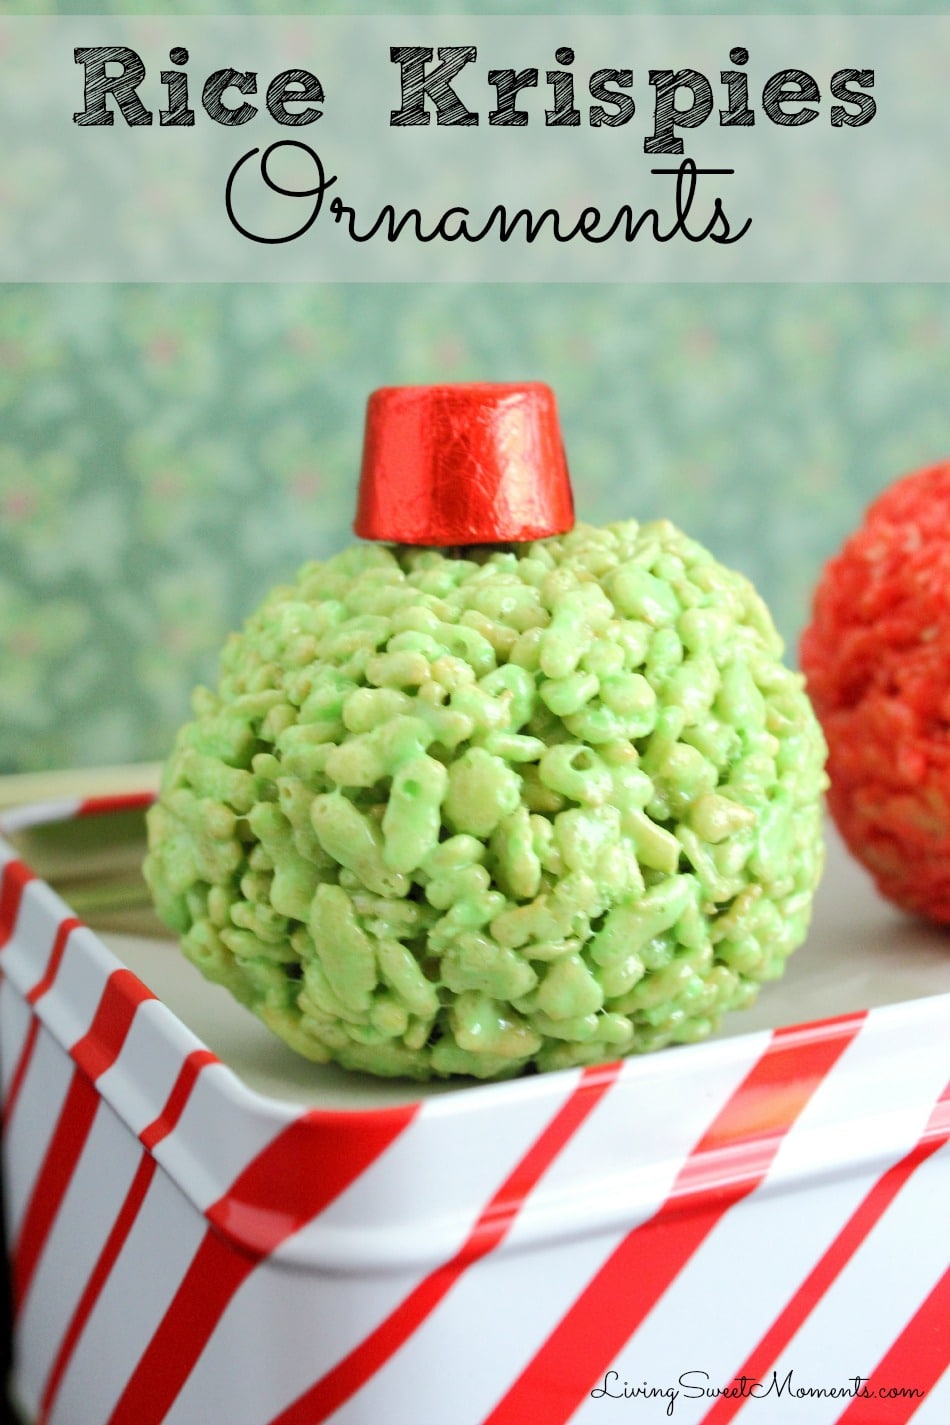 So simple and cute, these Rice Krispies Ornaments are made with just 5 ingredients. Top each one off with a Rolo or any other kind of chocolate for a realistic effect. 